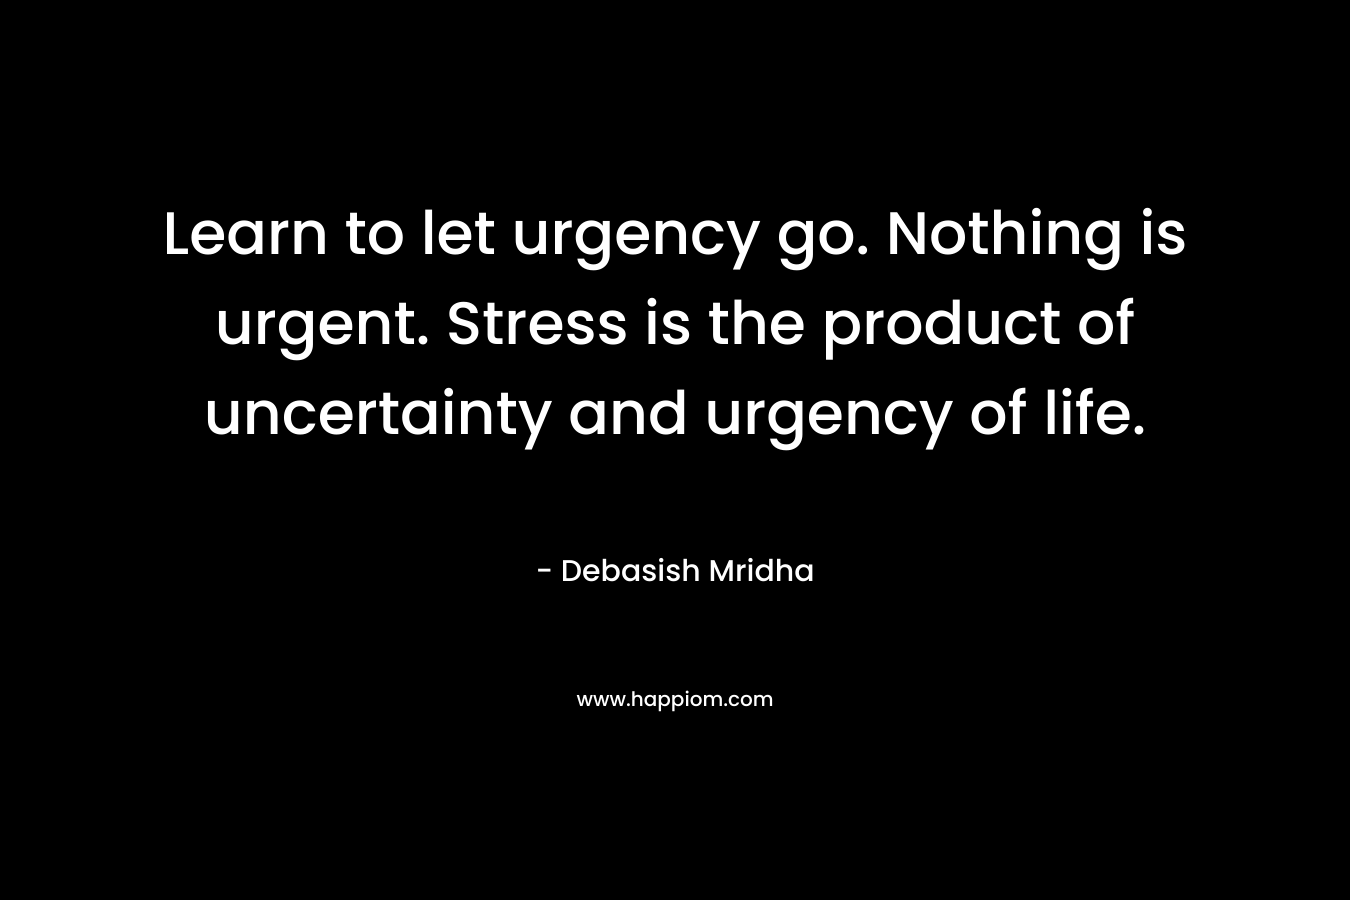 Learn to let urgency go. Nothing is urgent. Stress is the product of uncertainty and urgency of life.